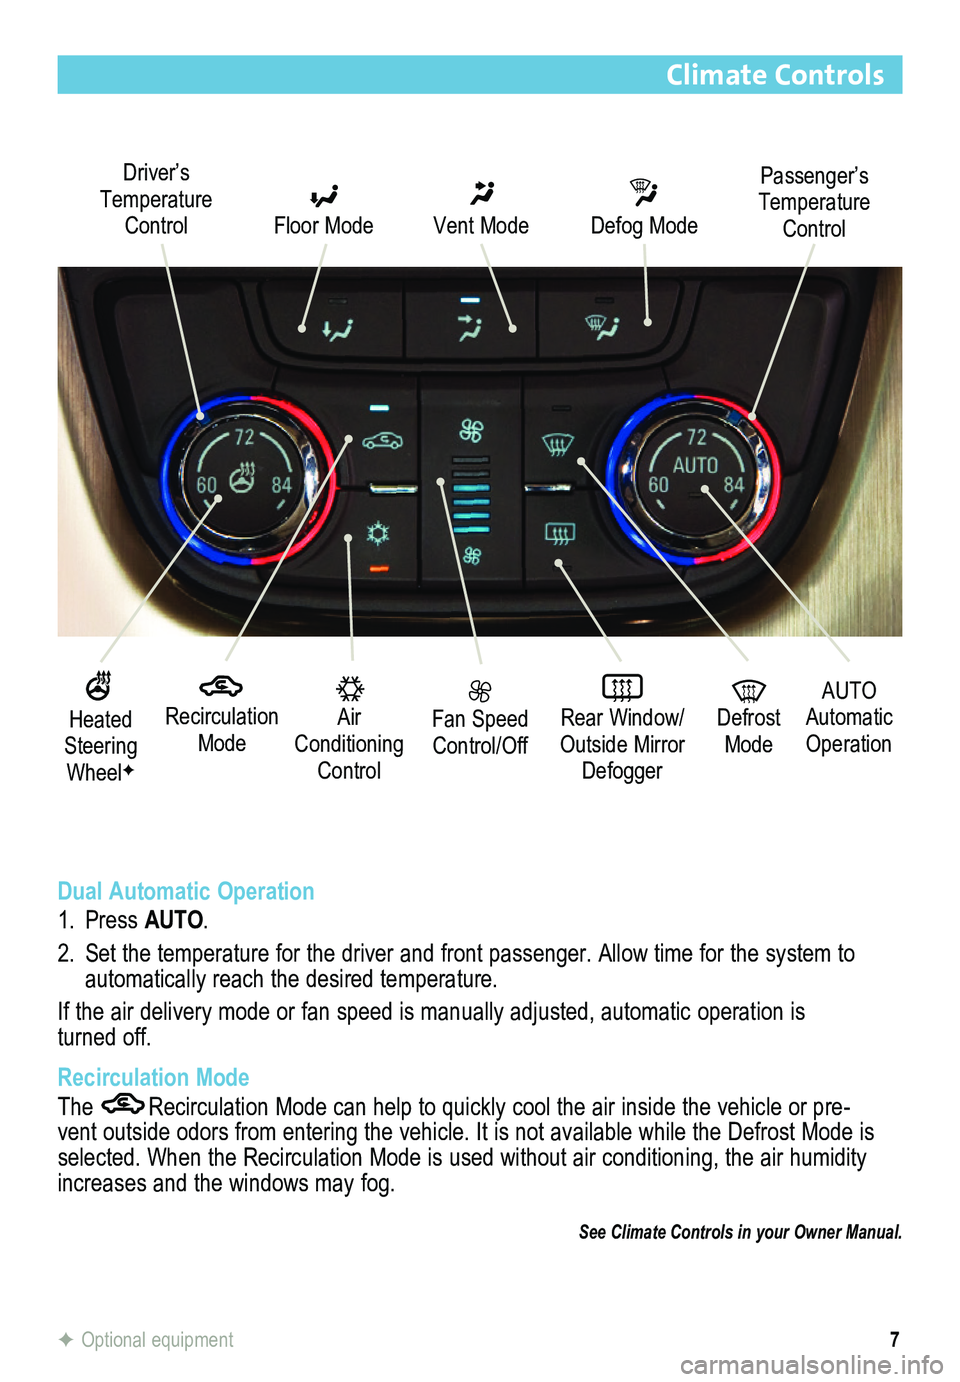 BUICK VERANO 2015  Get To Know Guide 7
Climate Controls
 
Recirculation Mode
Driver’s Temperature Control  Floor Mode
 Vent Mode
 Defog Mode
 Fan Speed Control/Off
 Rear Window/ Outside Mirror Defogger
  Air Conditioning Control
AUTO 
